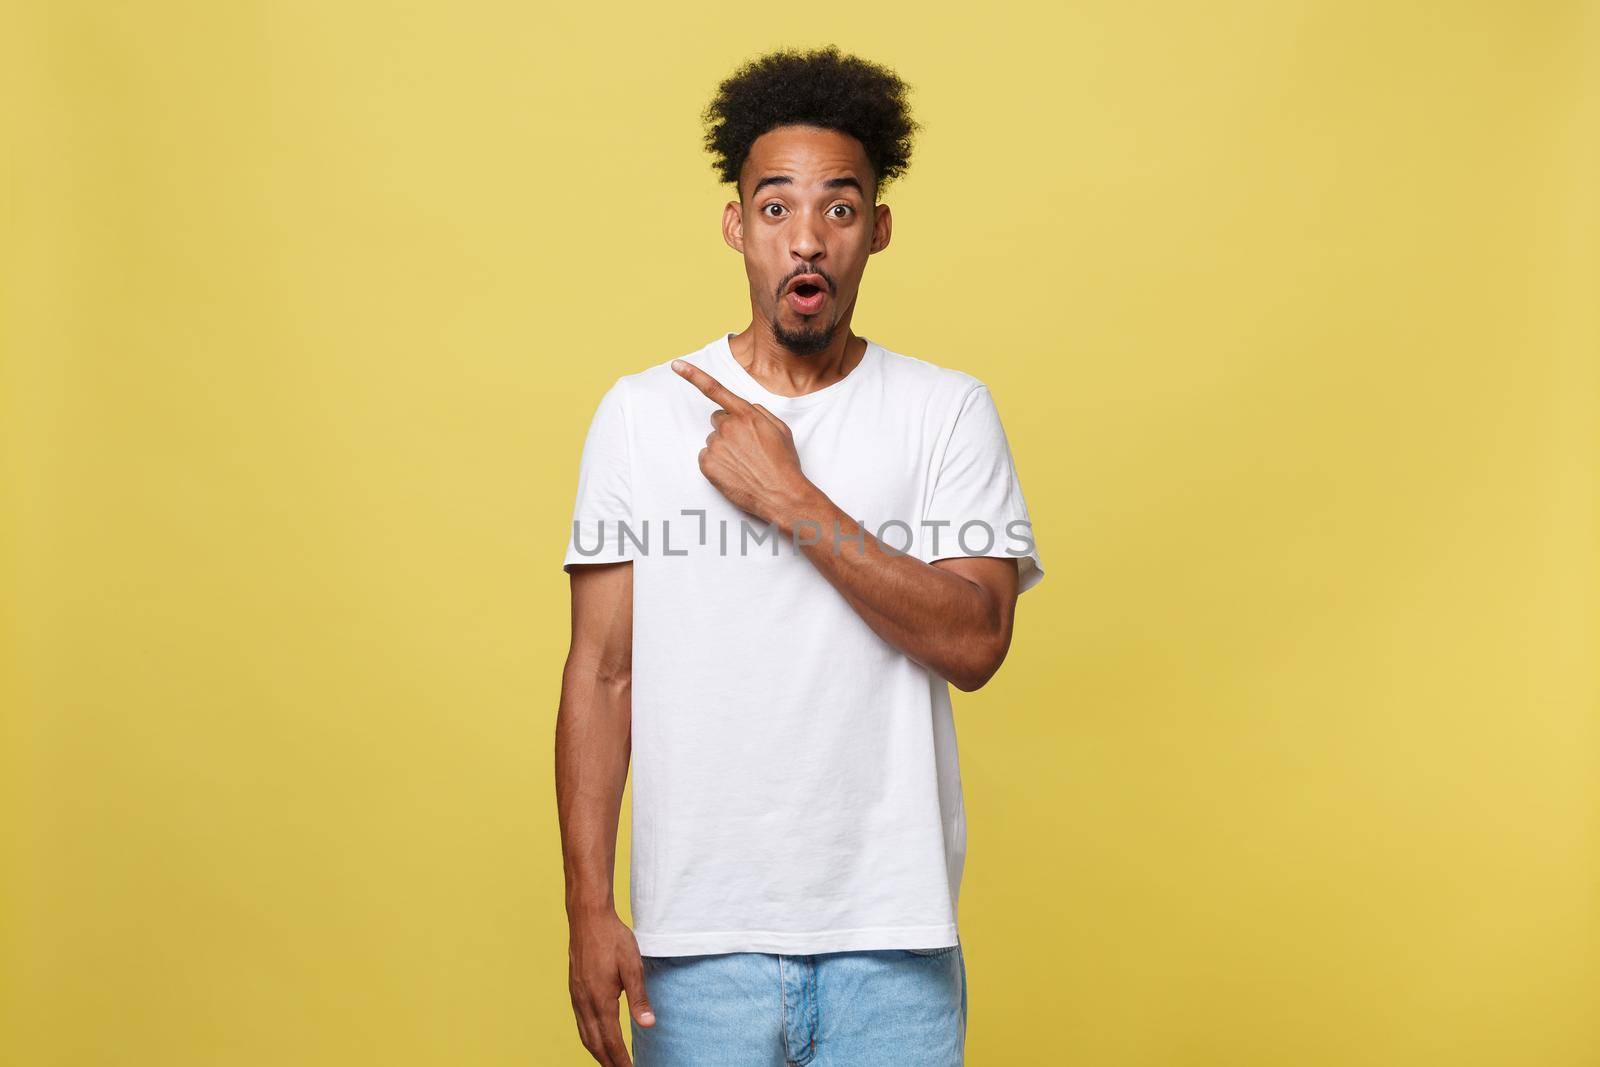 Astonished young African American man dressed in casual white shirt having excited fascinated look, pointing index finger at copy space on golden yellow background for your text or promotional content.